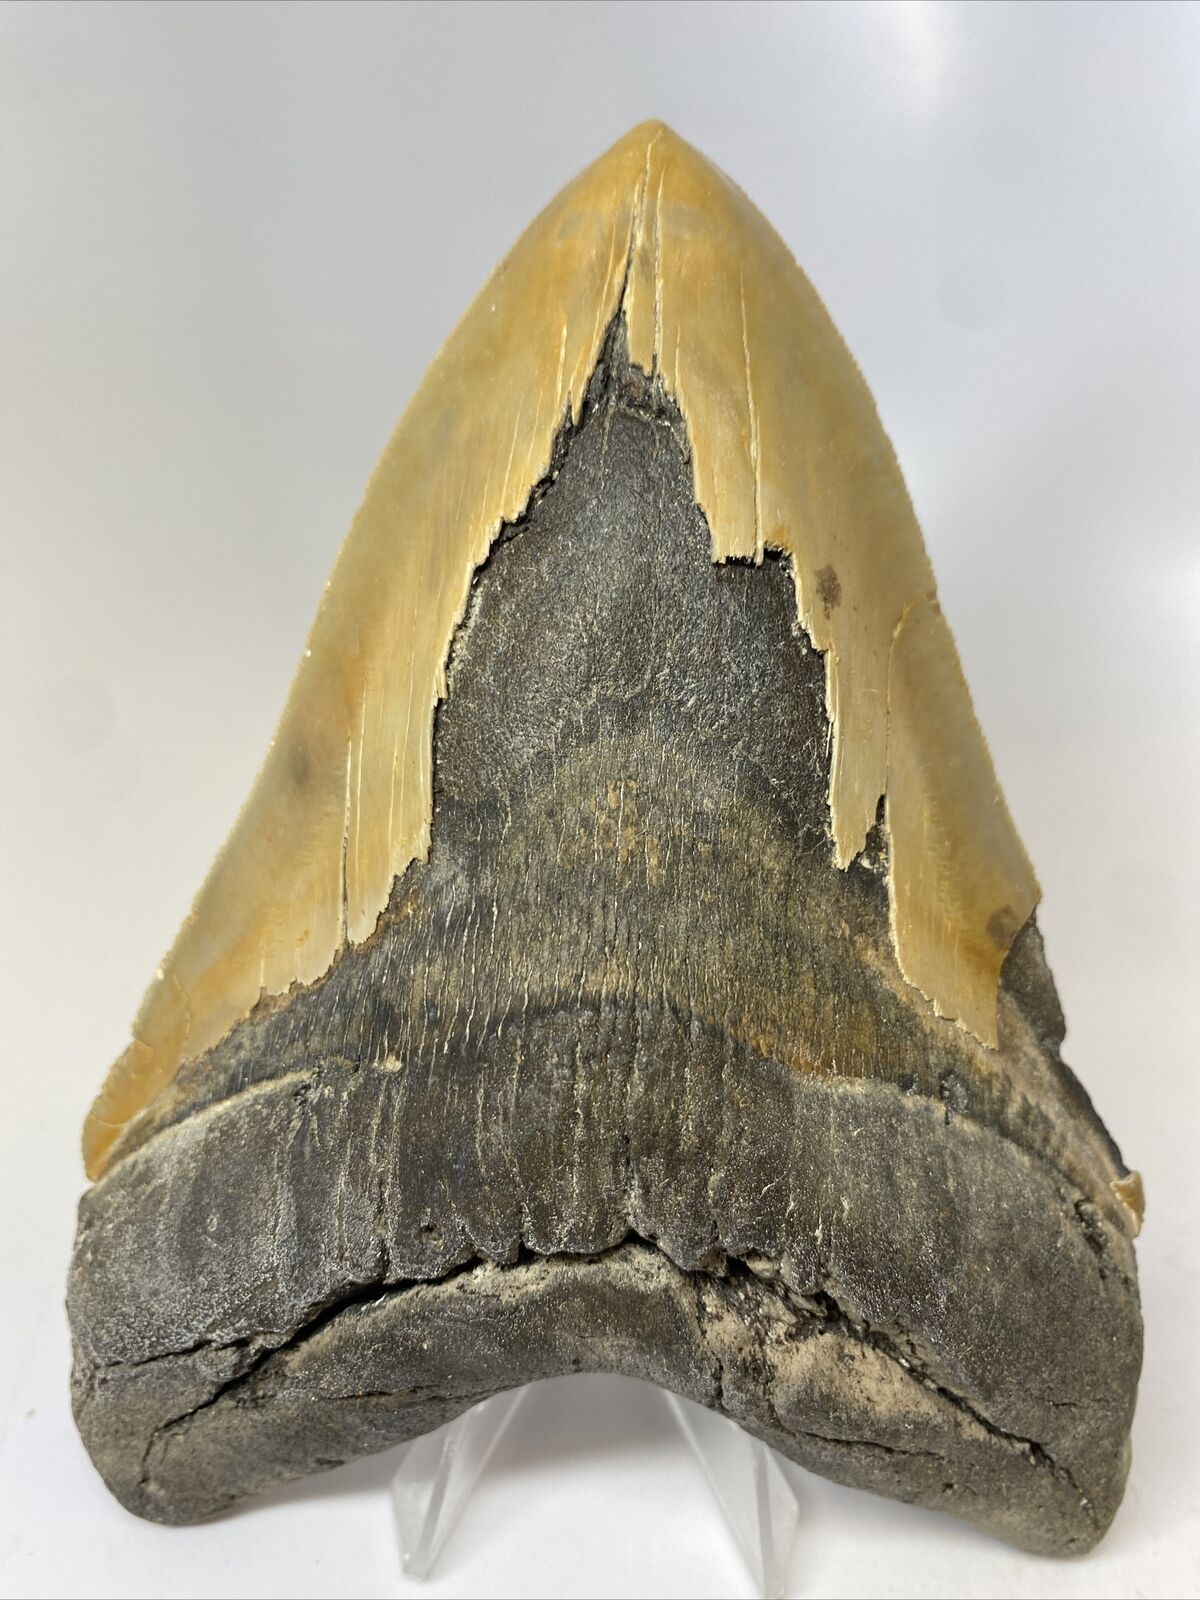 Megalodon Shark Tooth 6.26” Massive - Serrated Fossil - Authentic 11934